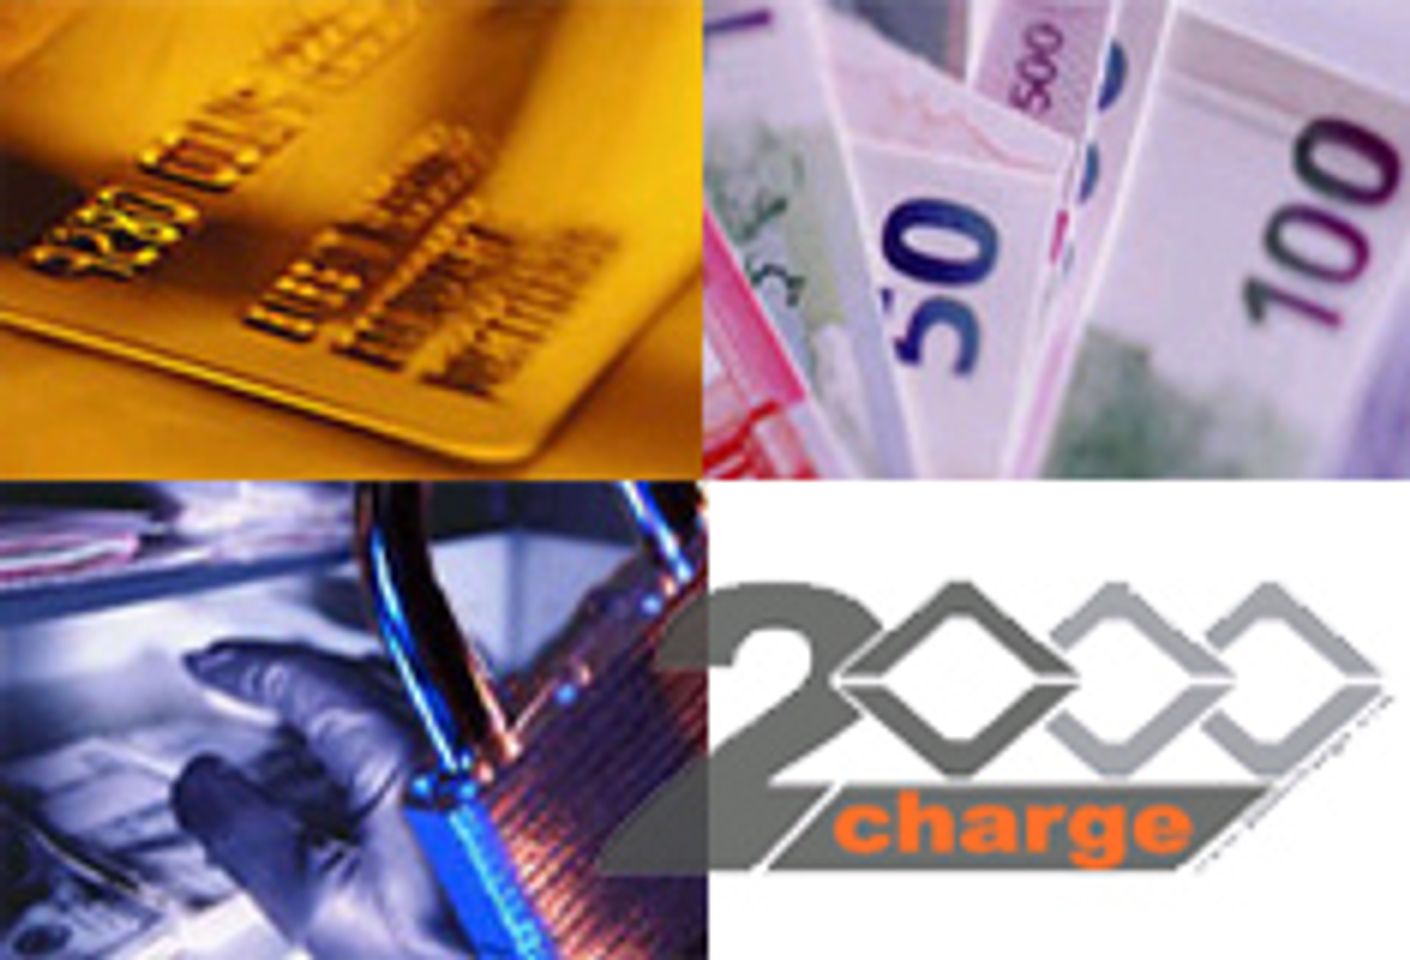 2000Charge Adds European Direct Debit System